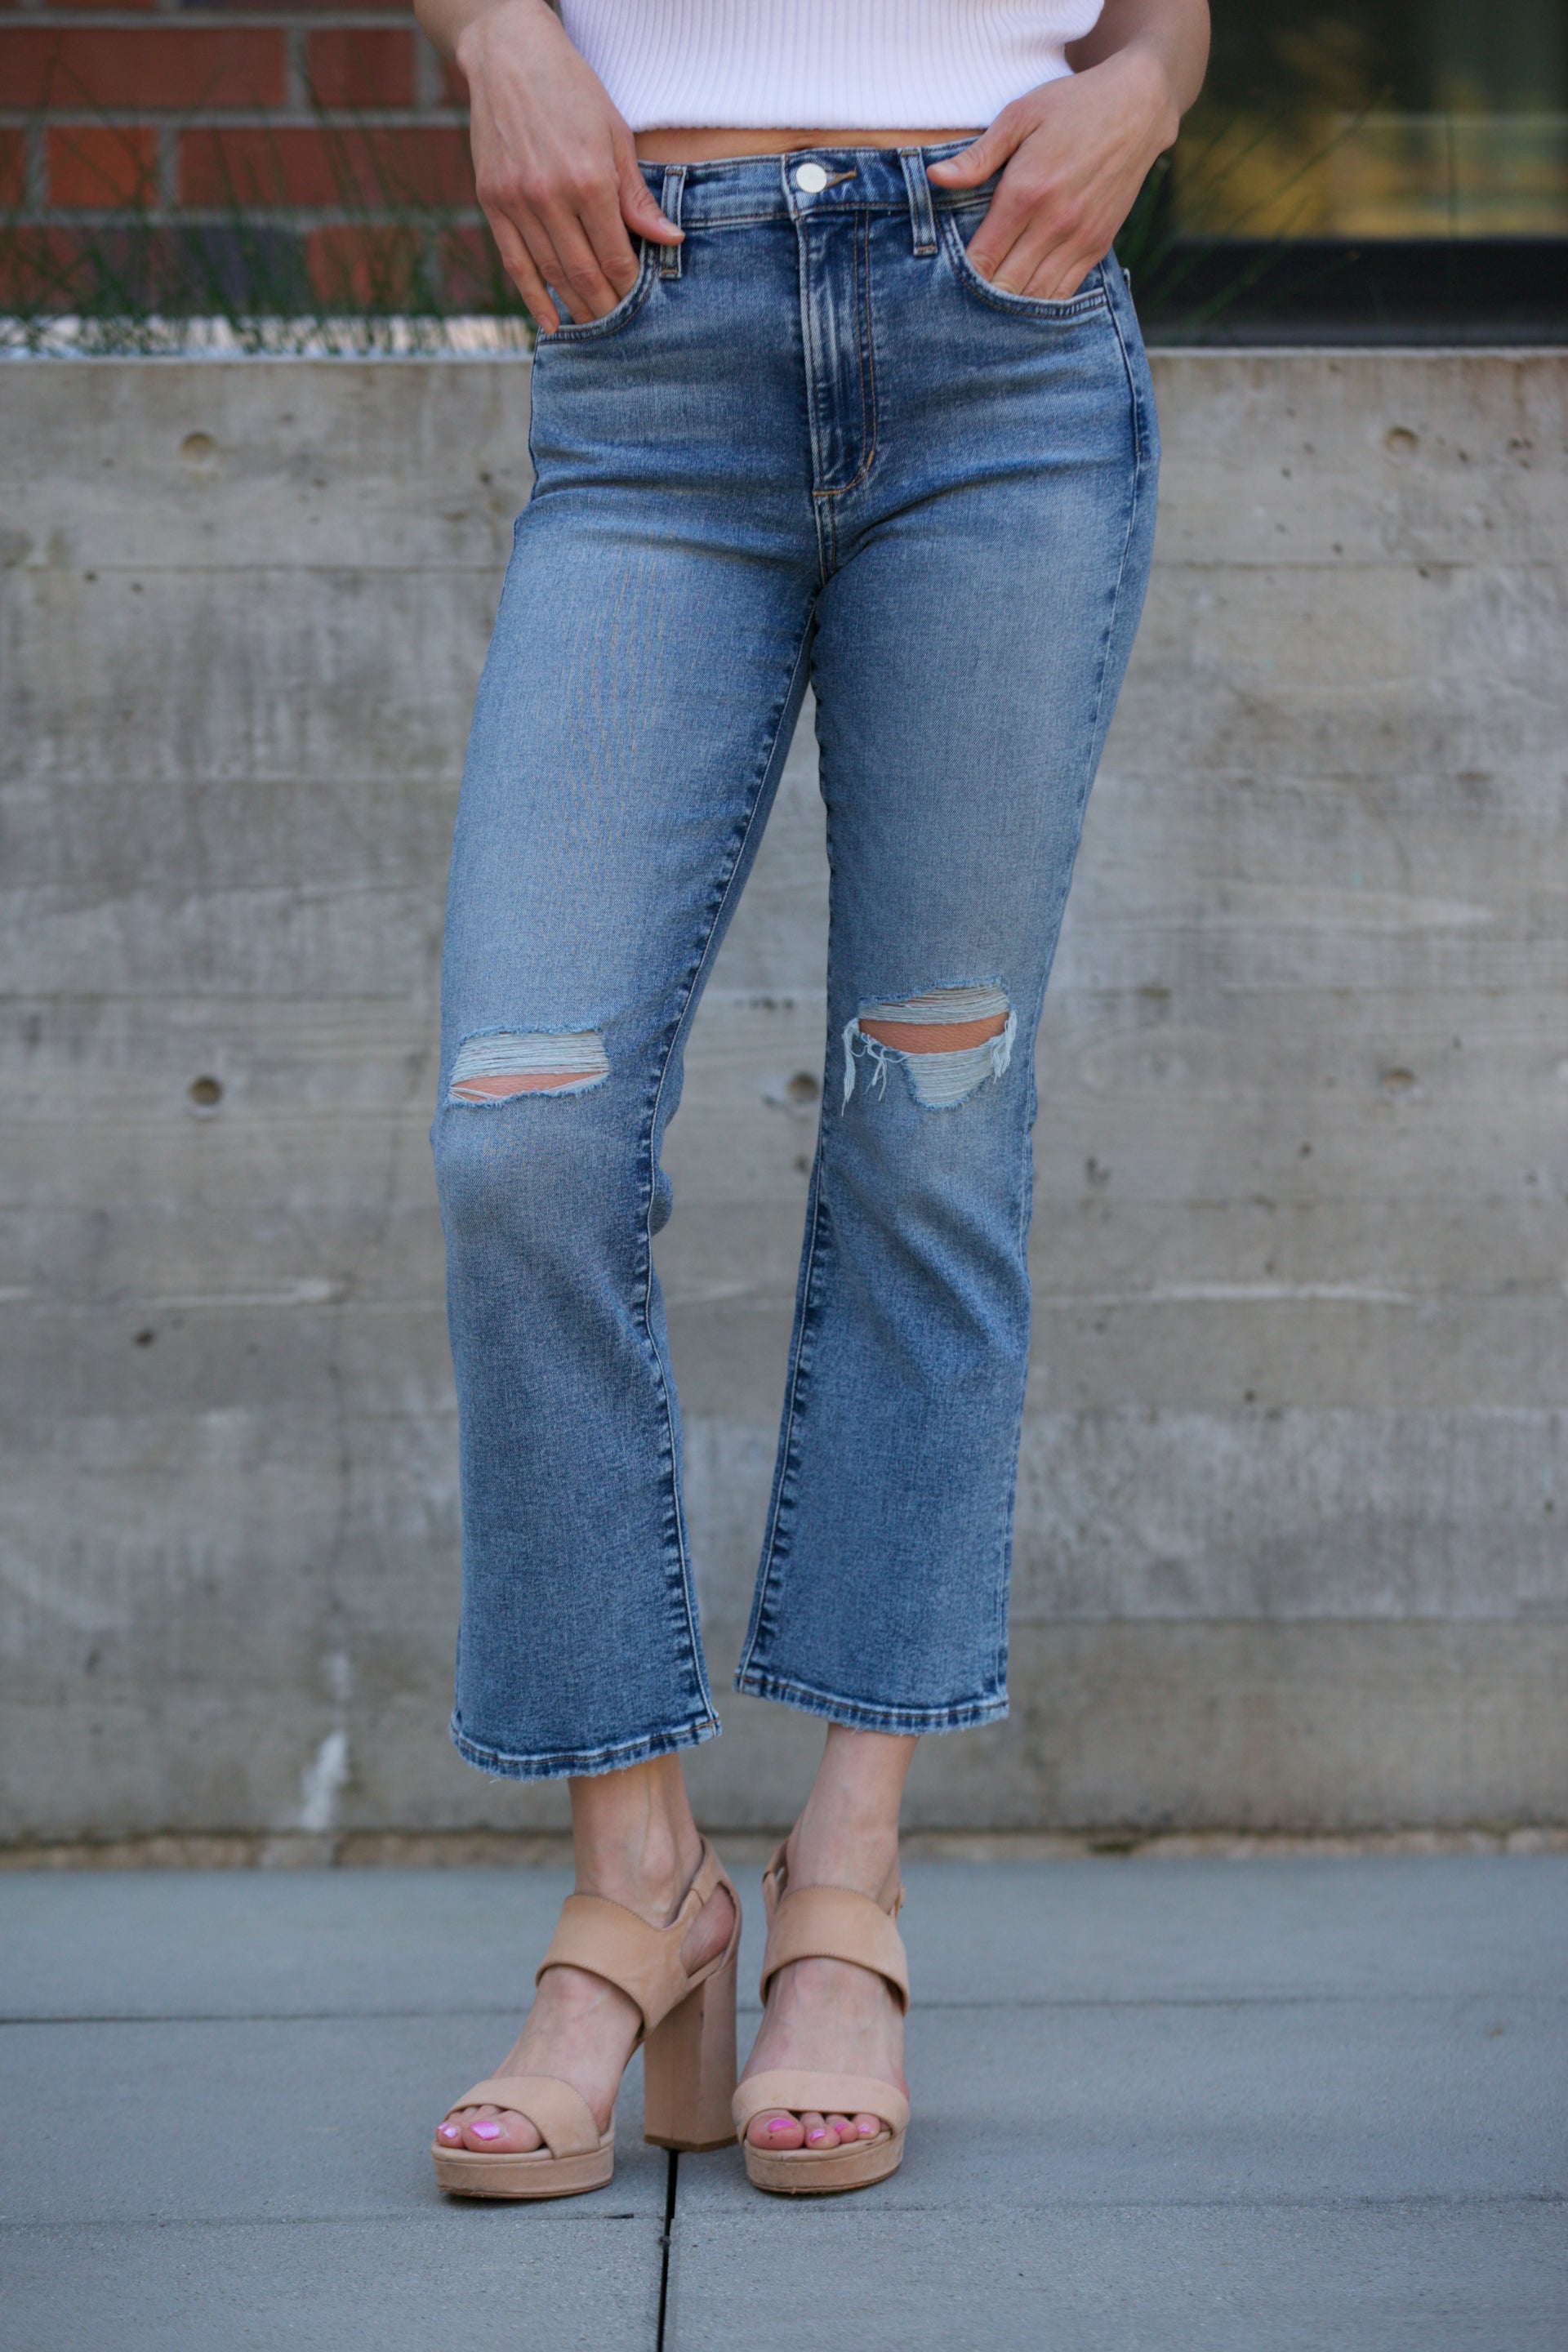 JOE'S JEANS The Callie High Rise Cropped Bootcut in High Standards Destruct